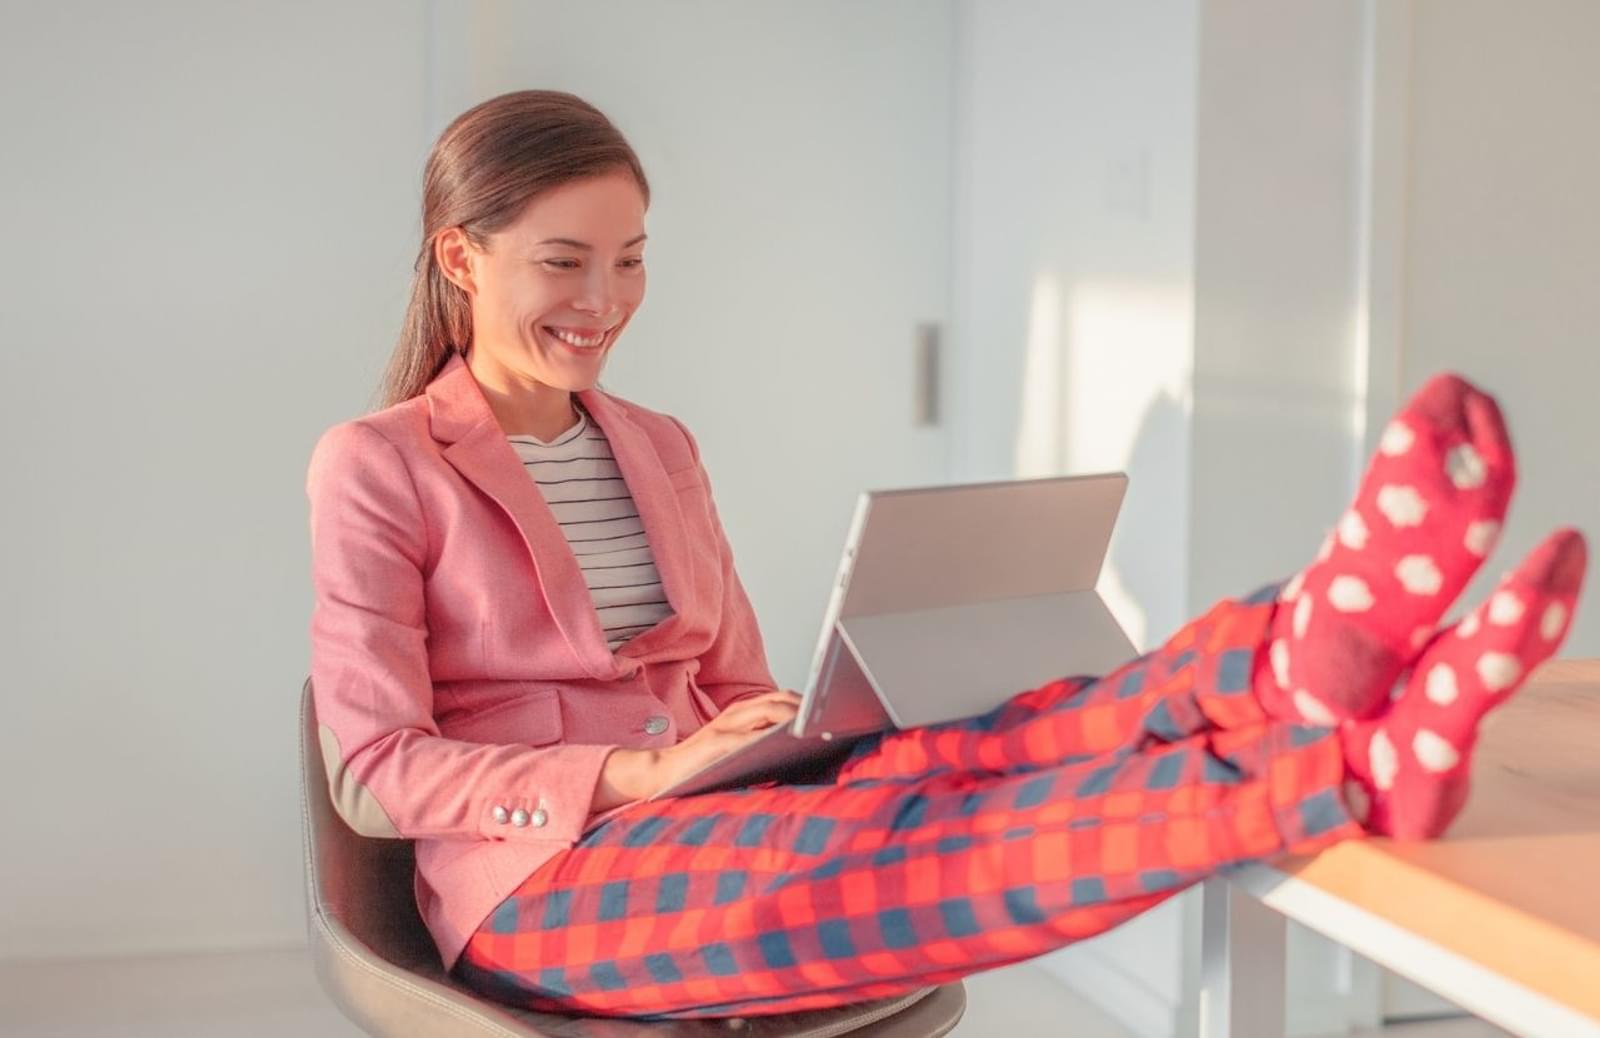 Woman with feet on desk, wearing pajamas, smiling while working on laptop computer